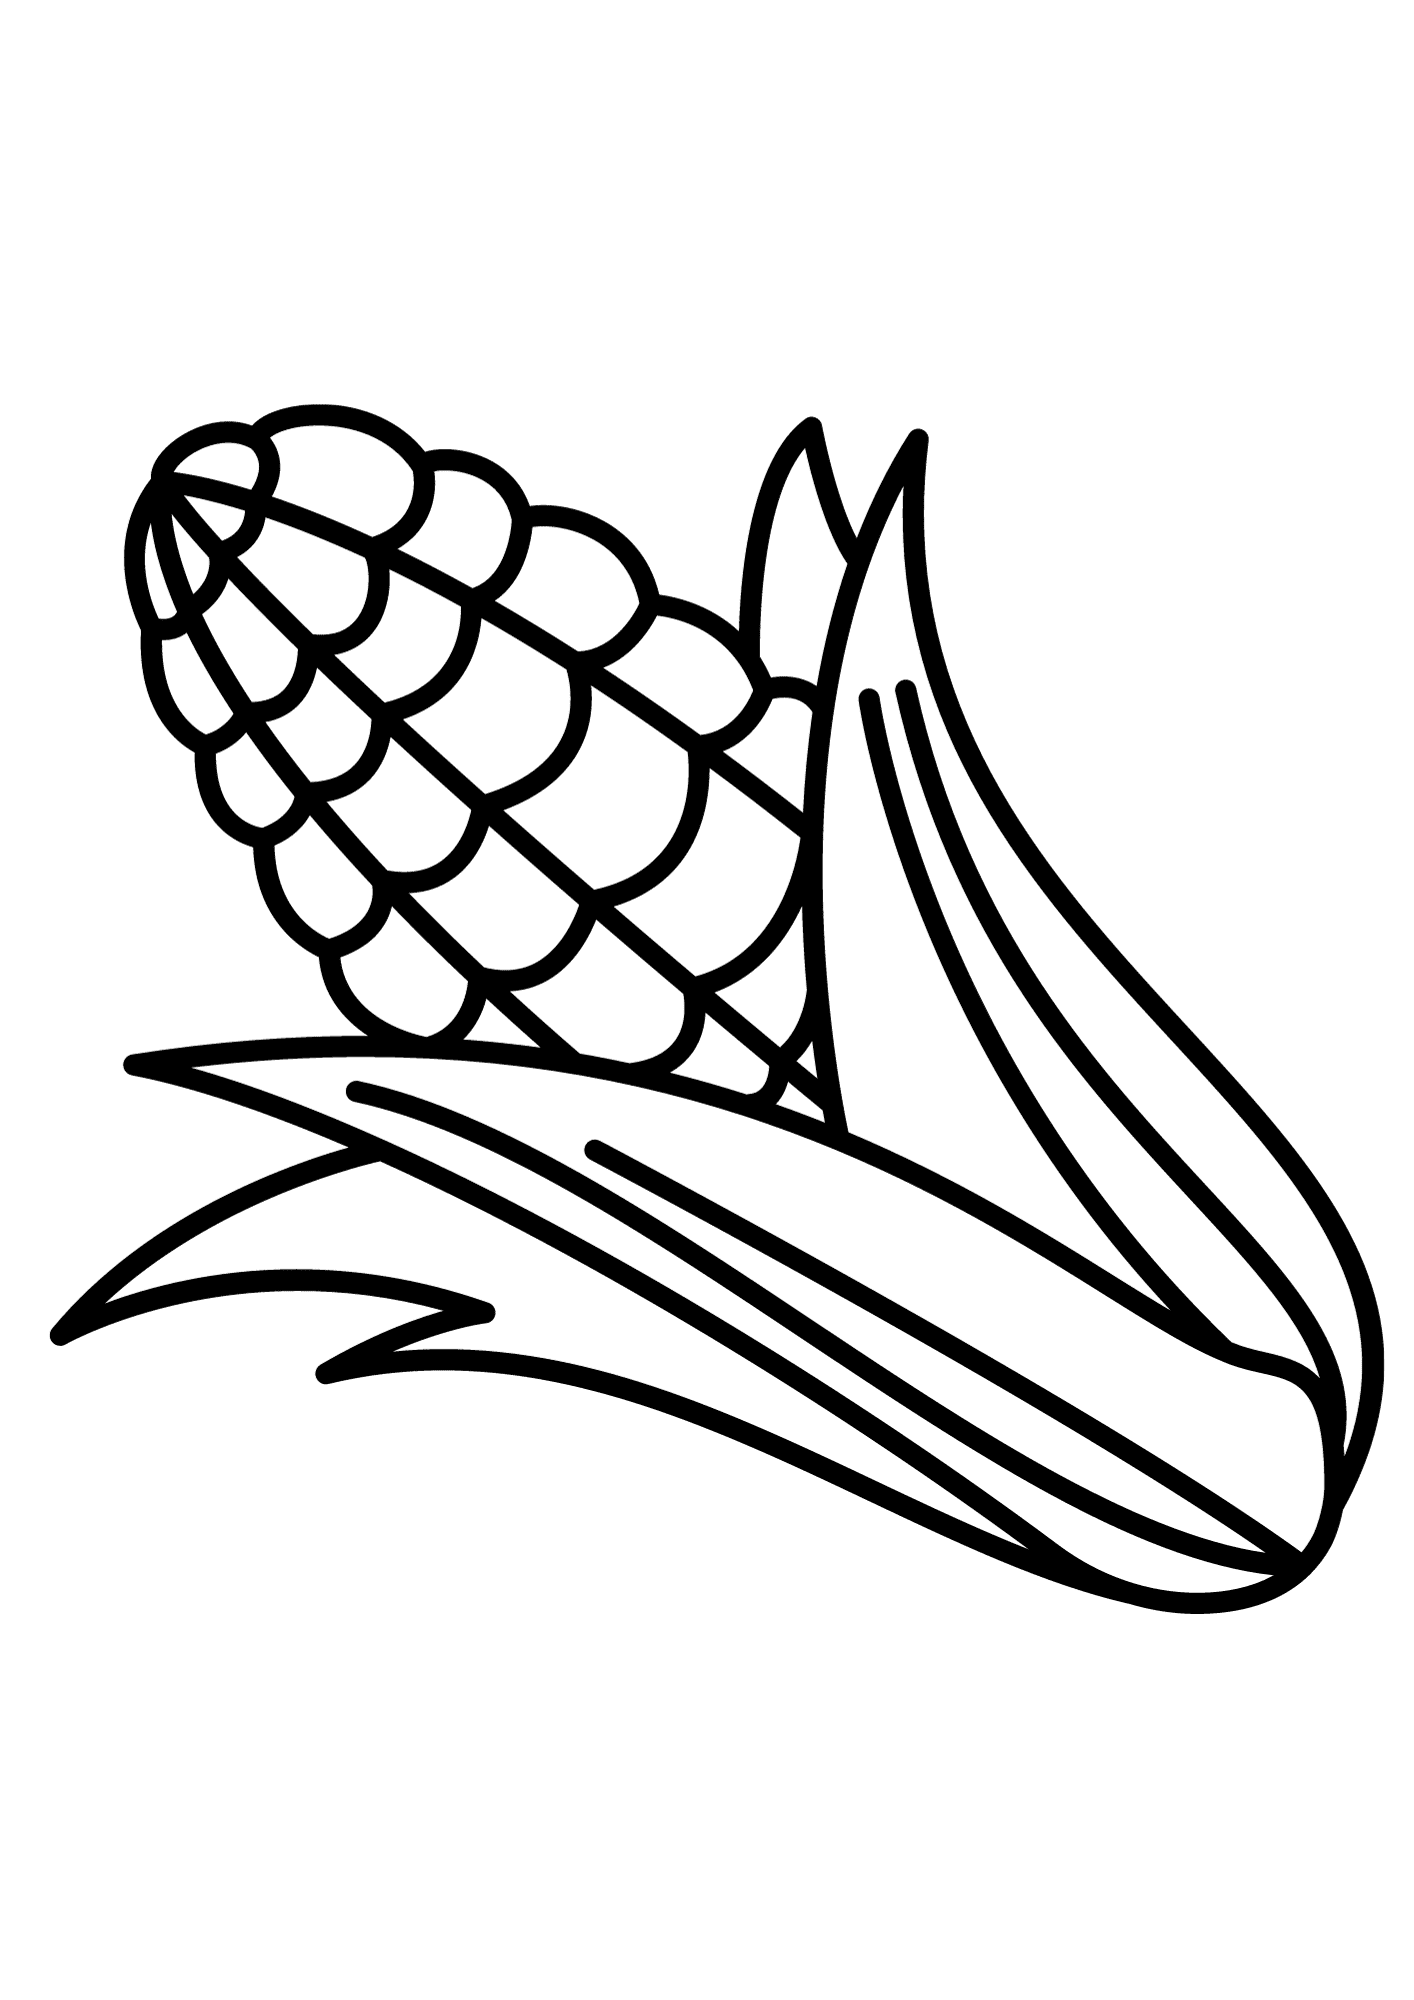 Corn Outline Coloring Page